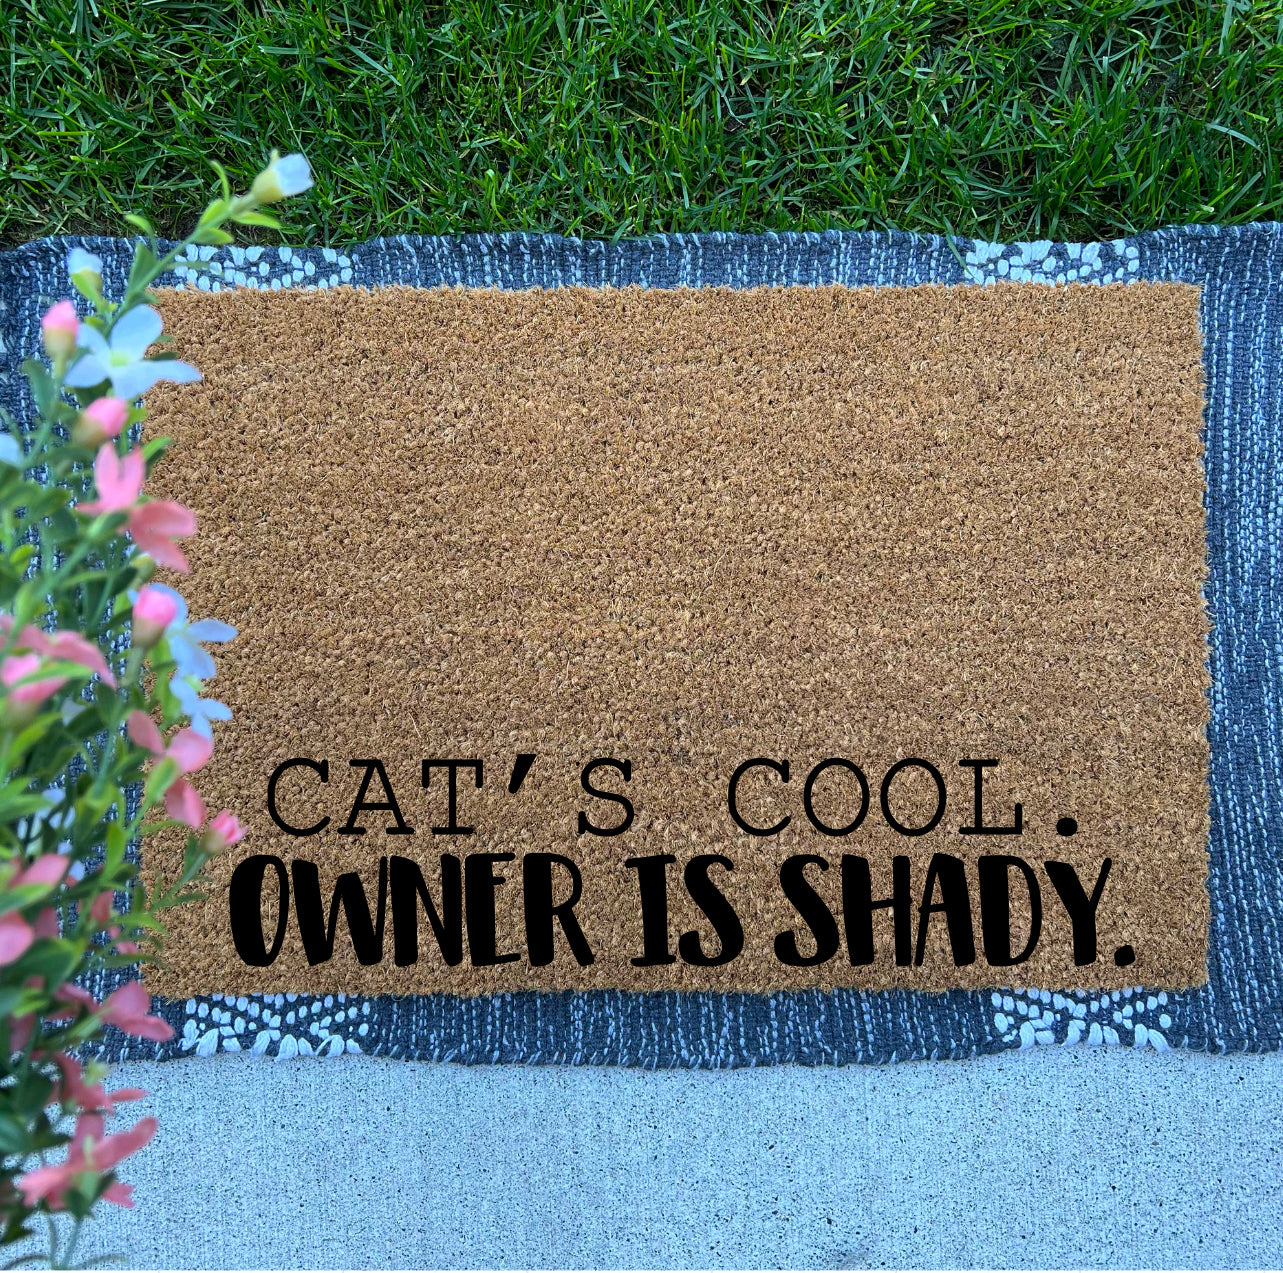 Cat’s Cool, Owner is Shady